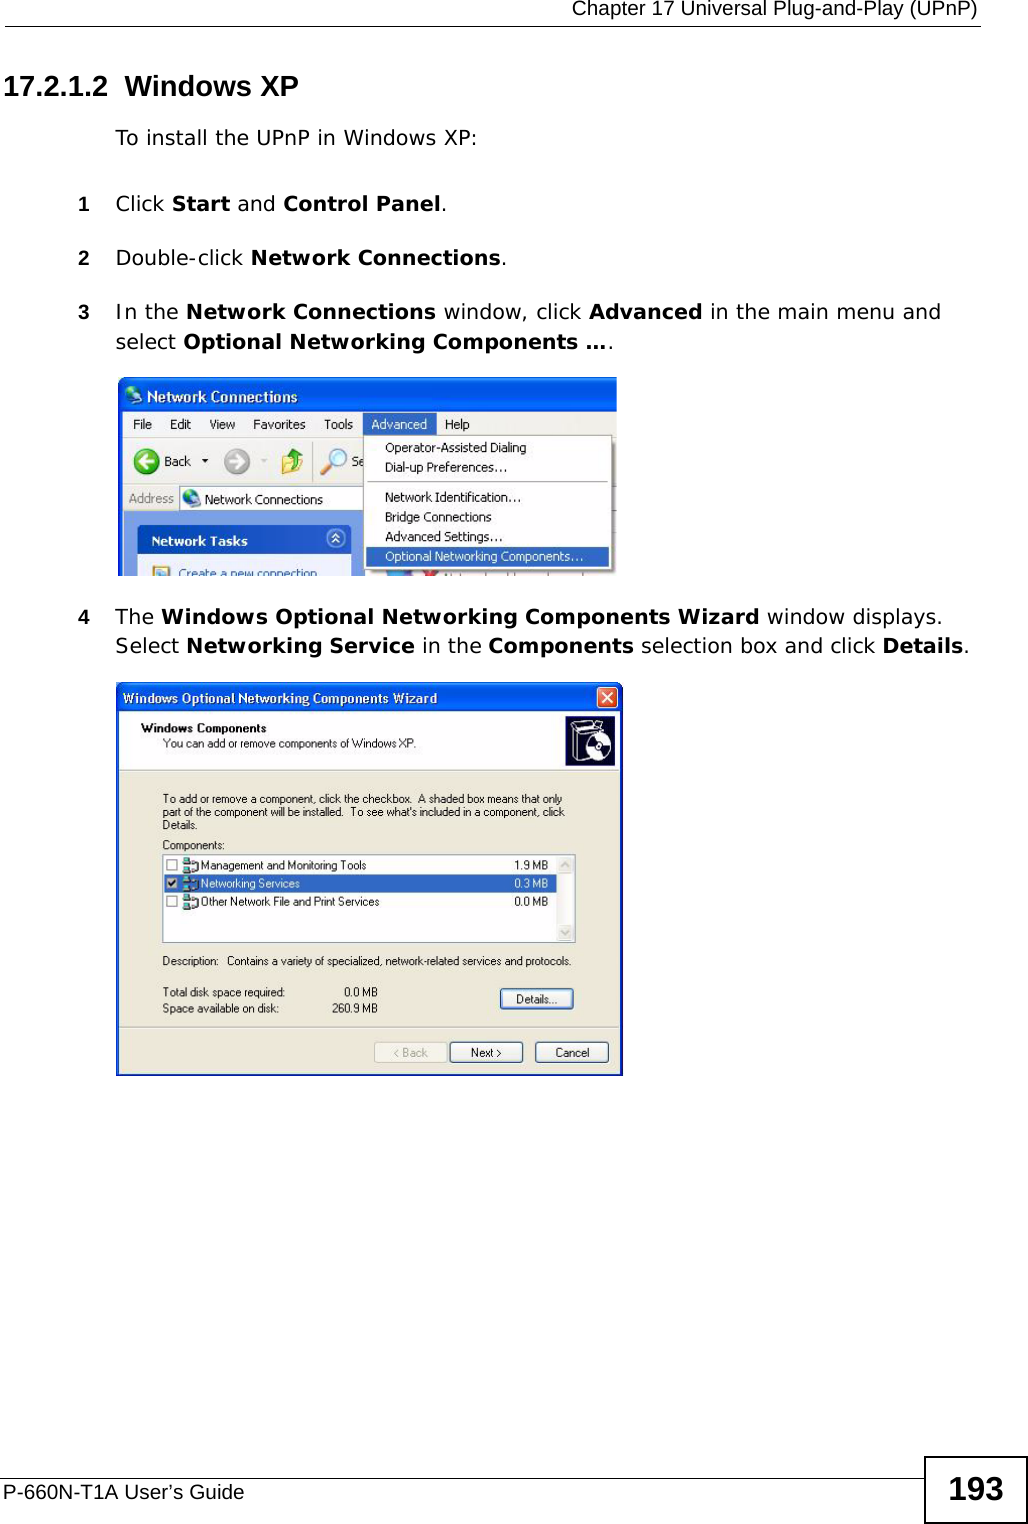  Chapter 17 Universal Plug-and-Play (UPnP)P-660N-T1A User’s Guide 19317.2.1.2  Windows XPTo install the UPnP in Windows XP:1Click Start and Control Panel. 2Double-click Network Connections.3In the Network Connections window, click Advanced in the main menu and select Optional Networking Components …. Network Co nnections4The Windows Optional Networking Components Wizard window displays. Select Networking Service in the Components selection box and click Details. Windows Optional Networking Components Wizard